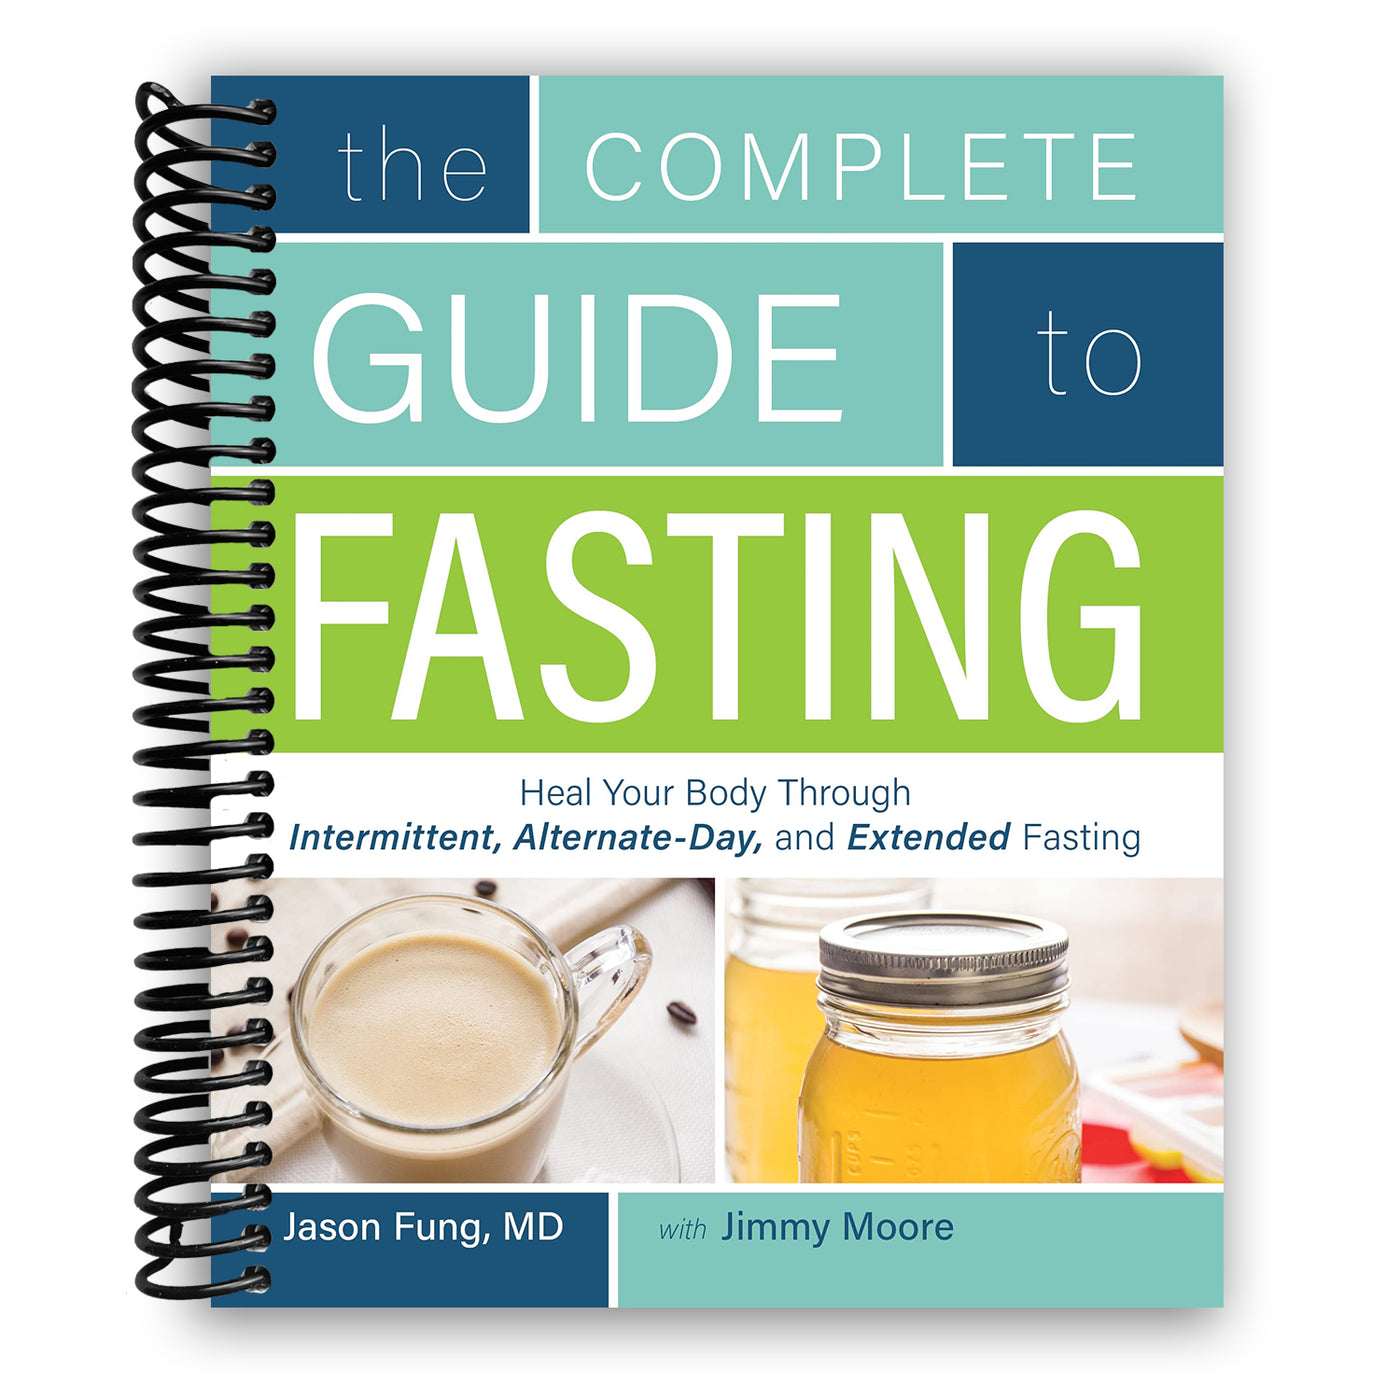 The Complete Guide to Fasting: Heal Your Body Through Intermittent, Alternate-Day, and Extended Fasting (Spiral Bound)